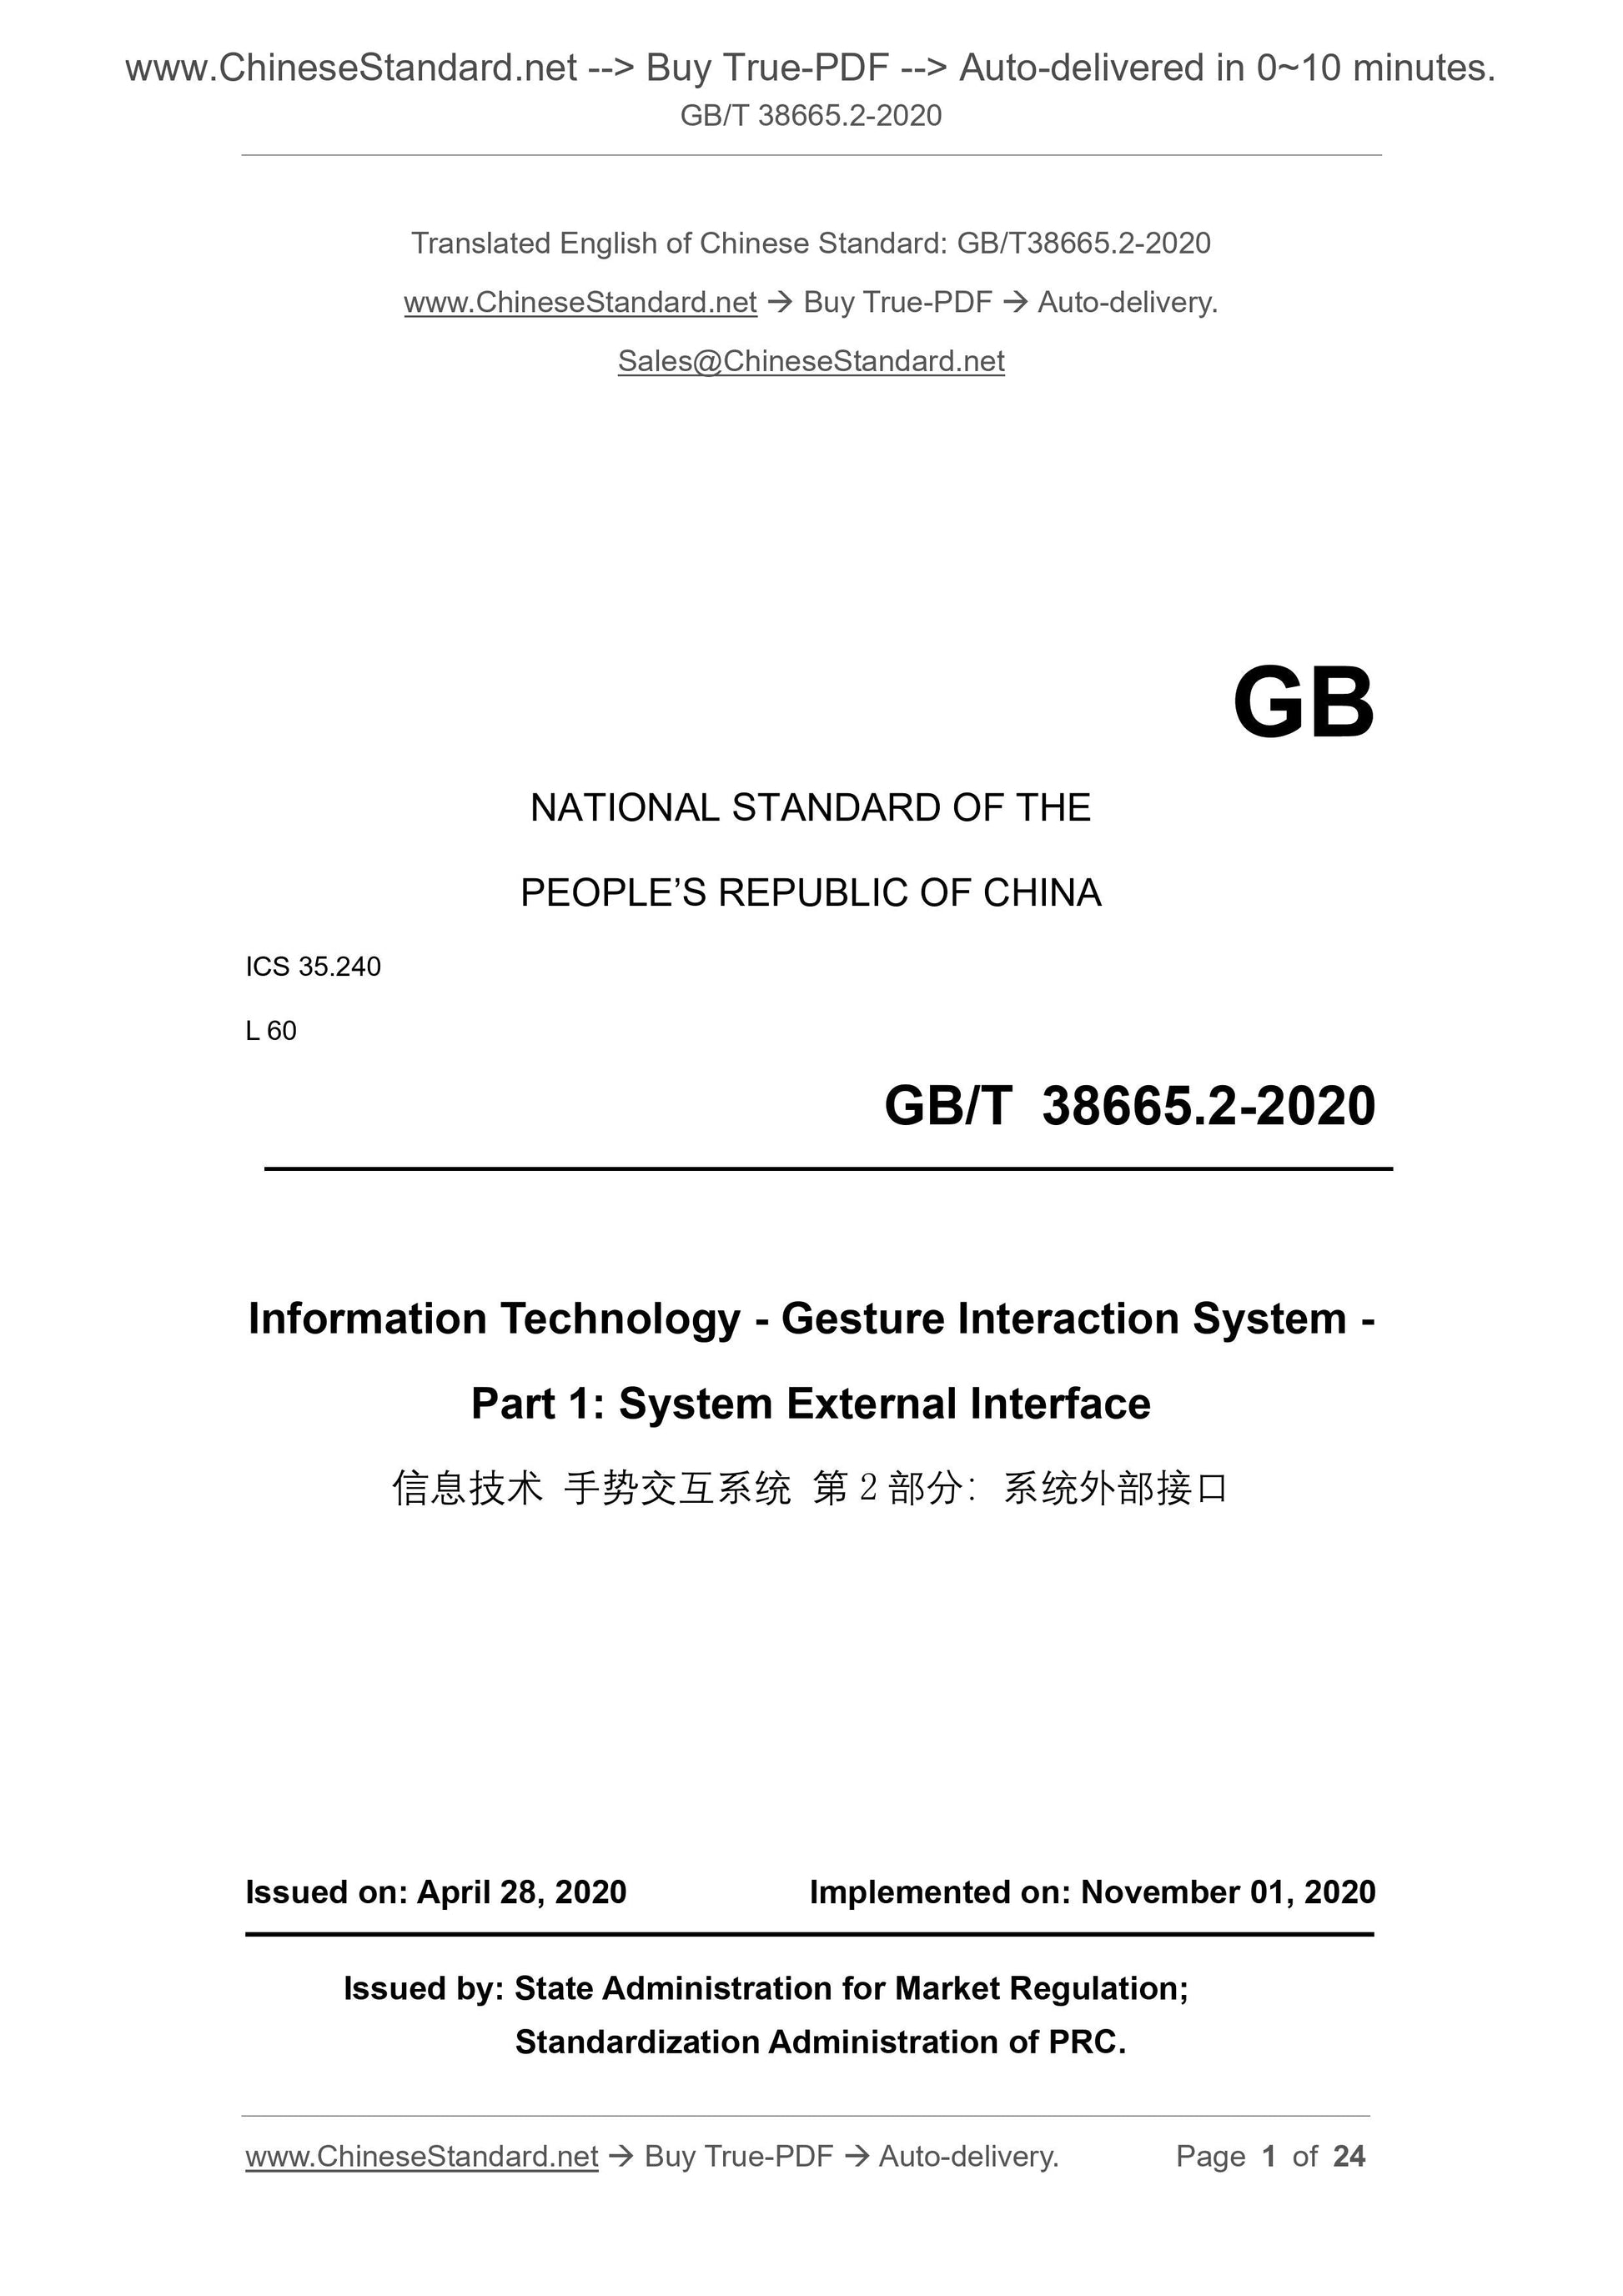 GB/T 38665.2-2020 Page 1